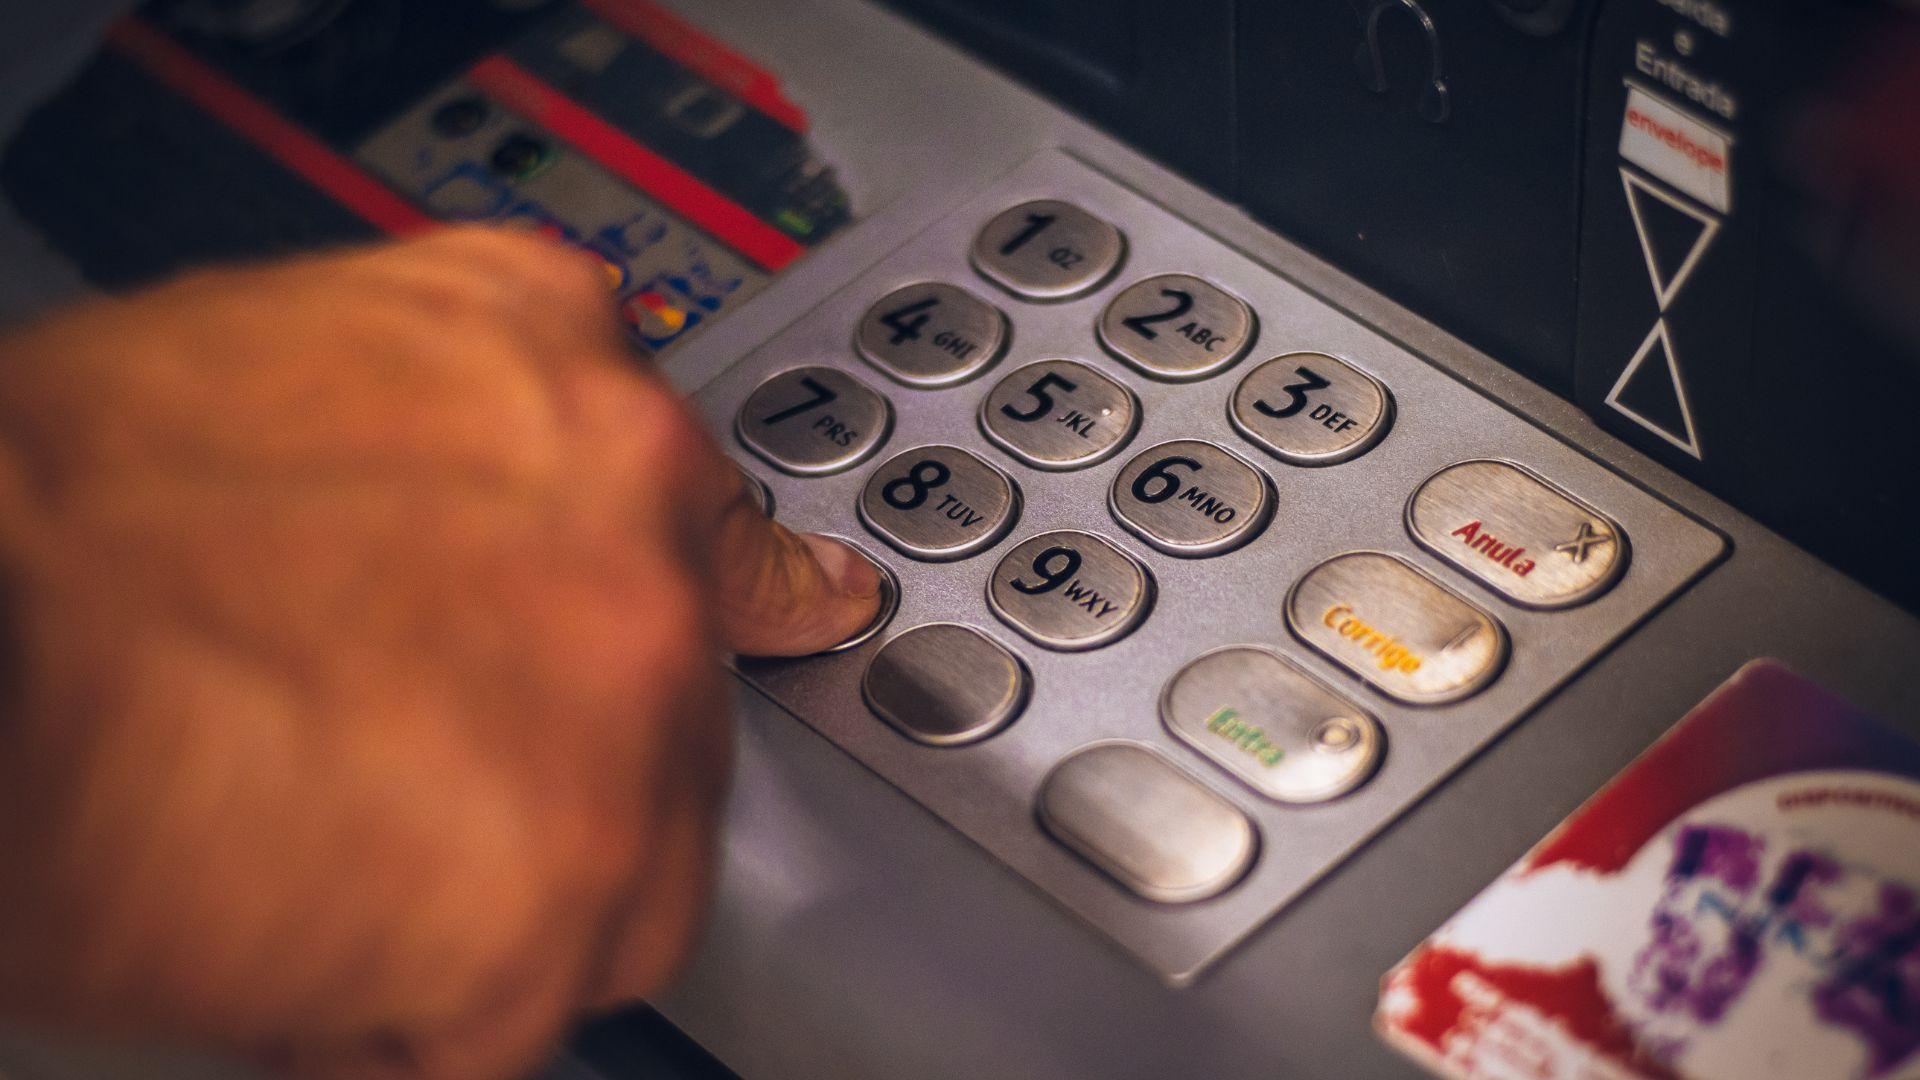 A close-up image of a person's hand pressing the buttons on an ATM keypad